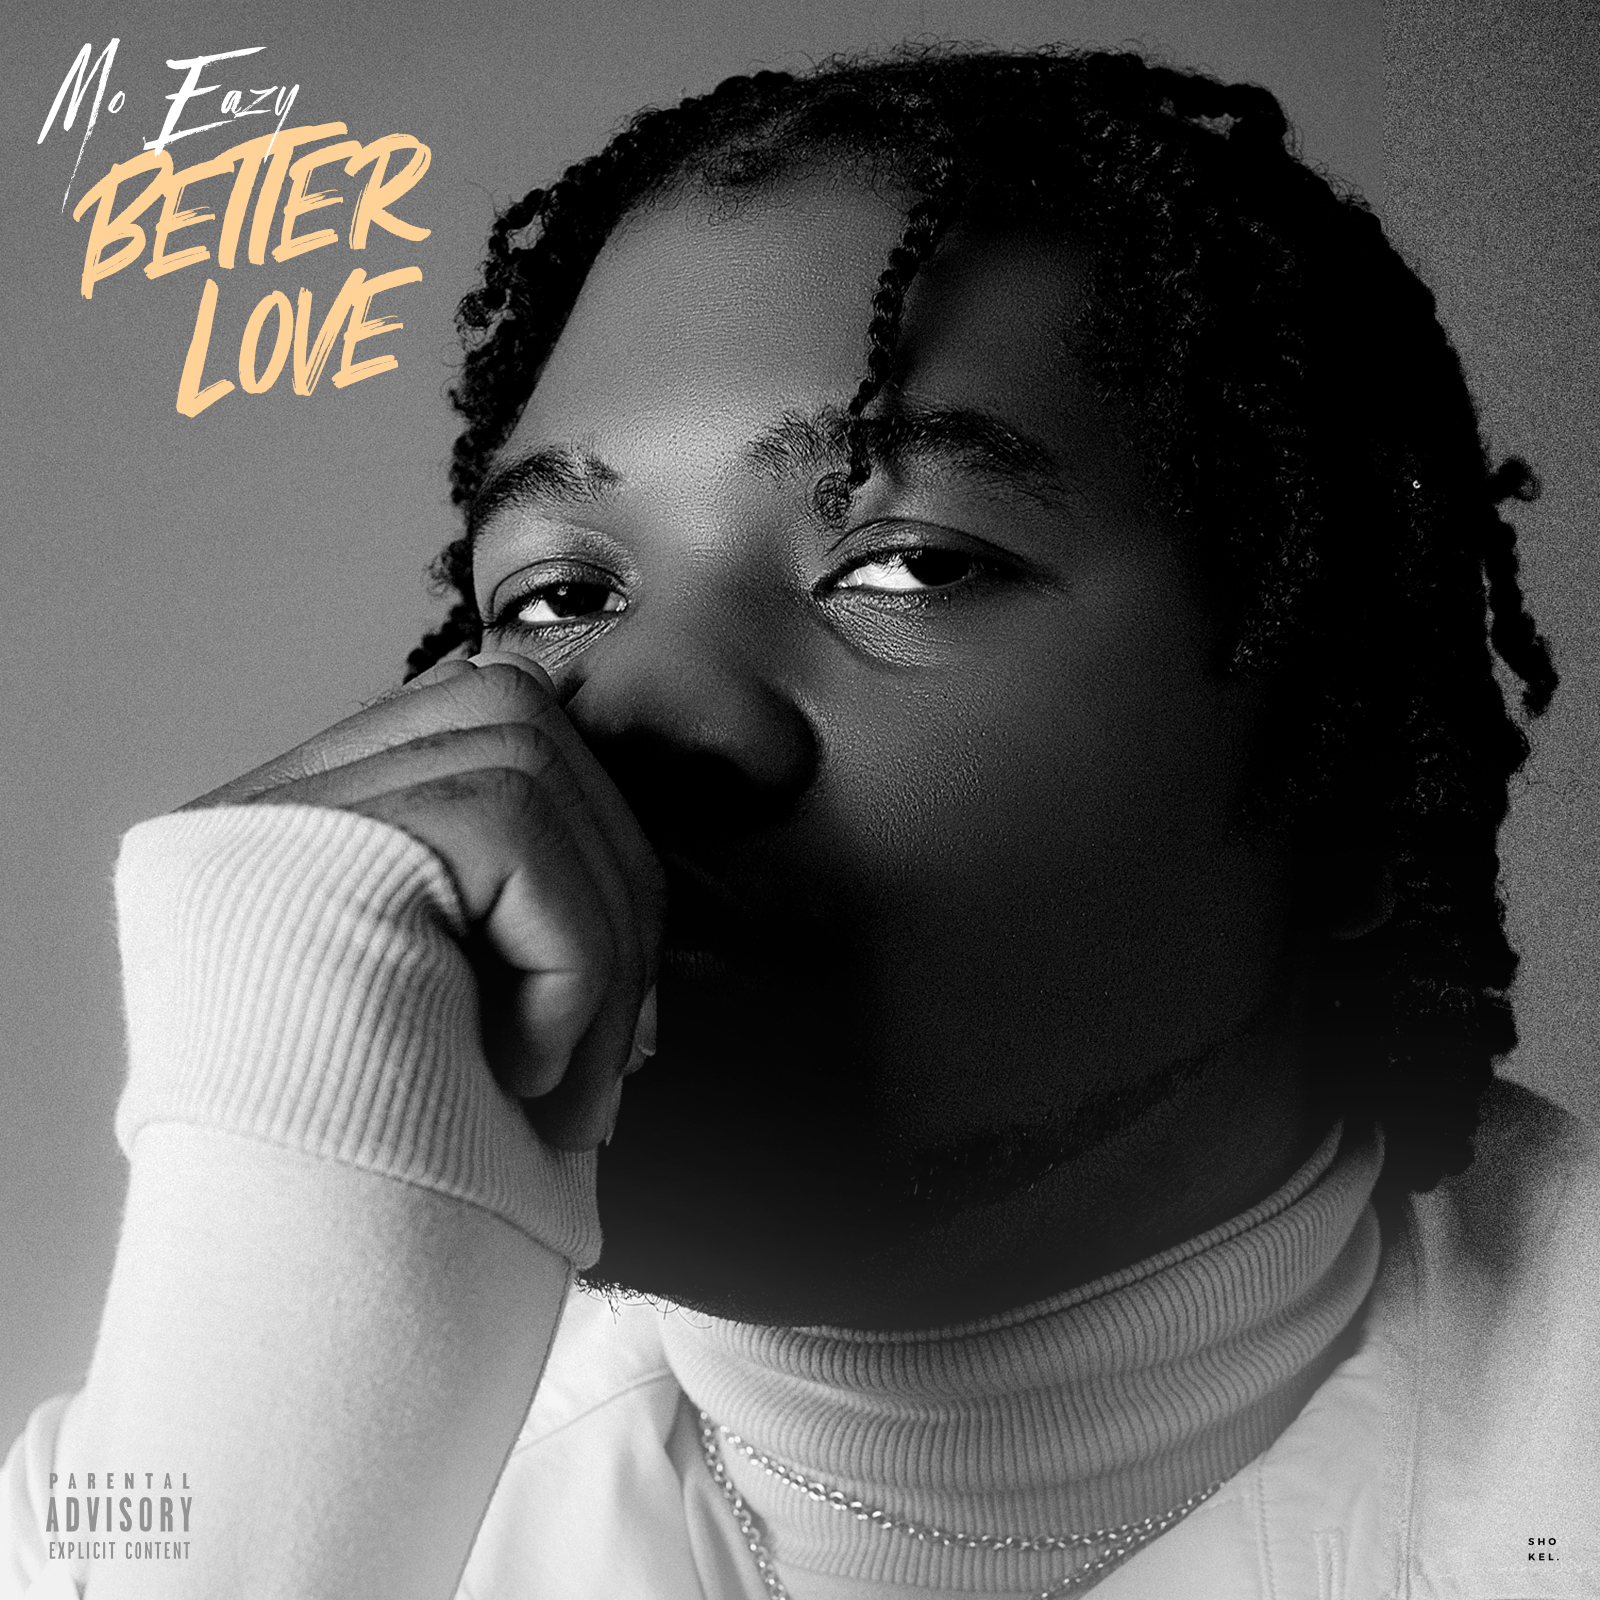 MO EAZY UNLEASHES BETTER LOVE AS A SINGLE OFF LOVE AND VIBES EP